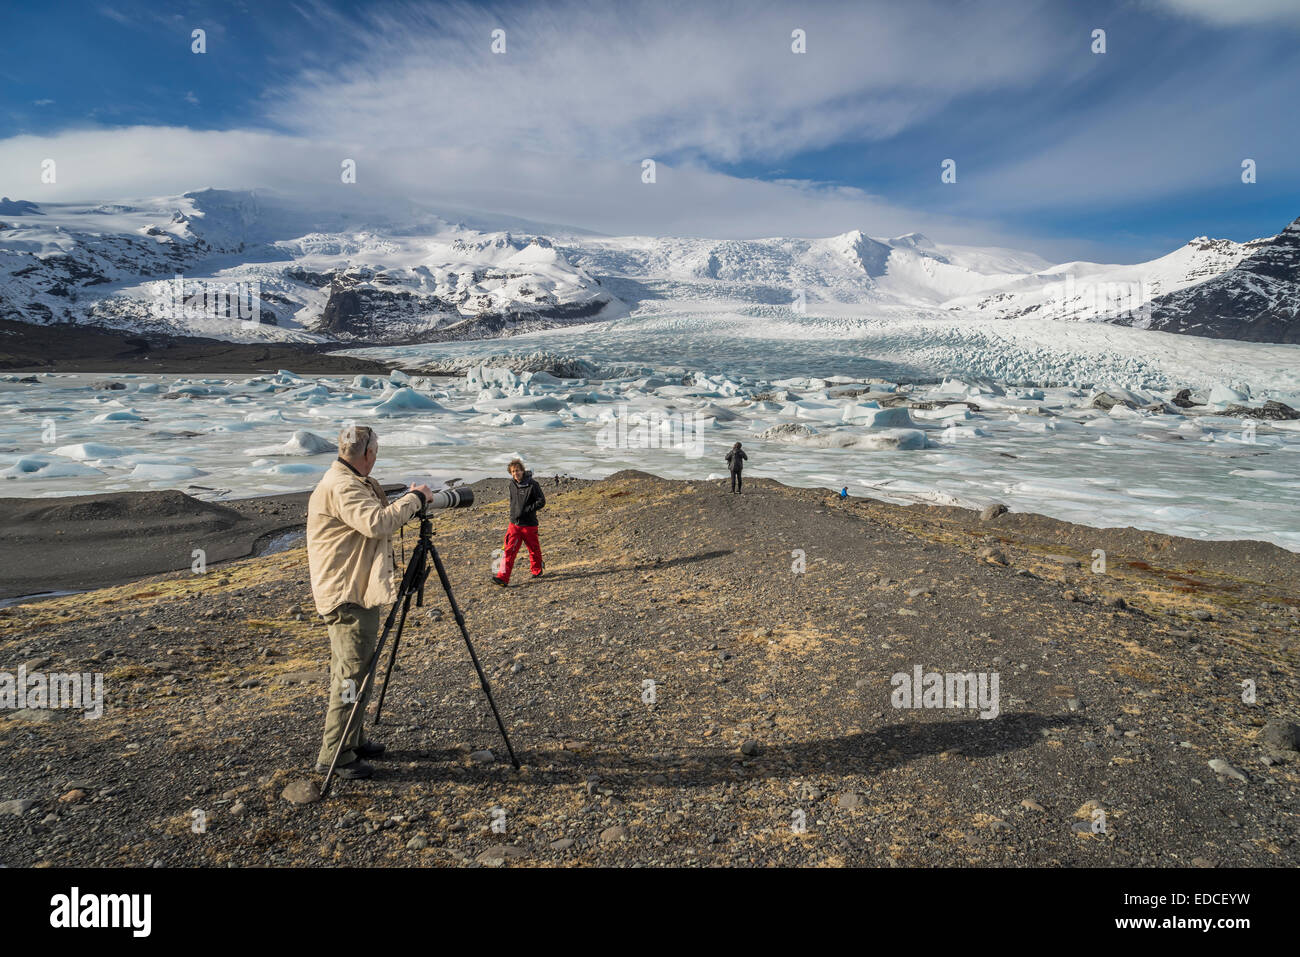 Taking pictures at the Fjallsarlon Glacial Lagoon, Iceland Stock Photo